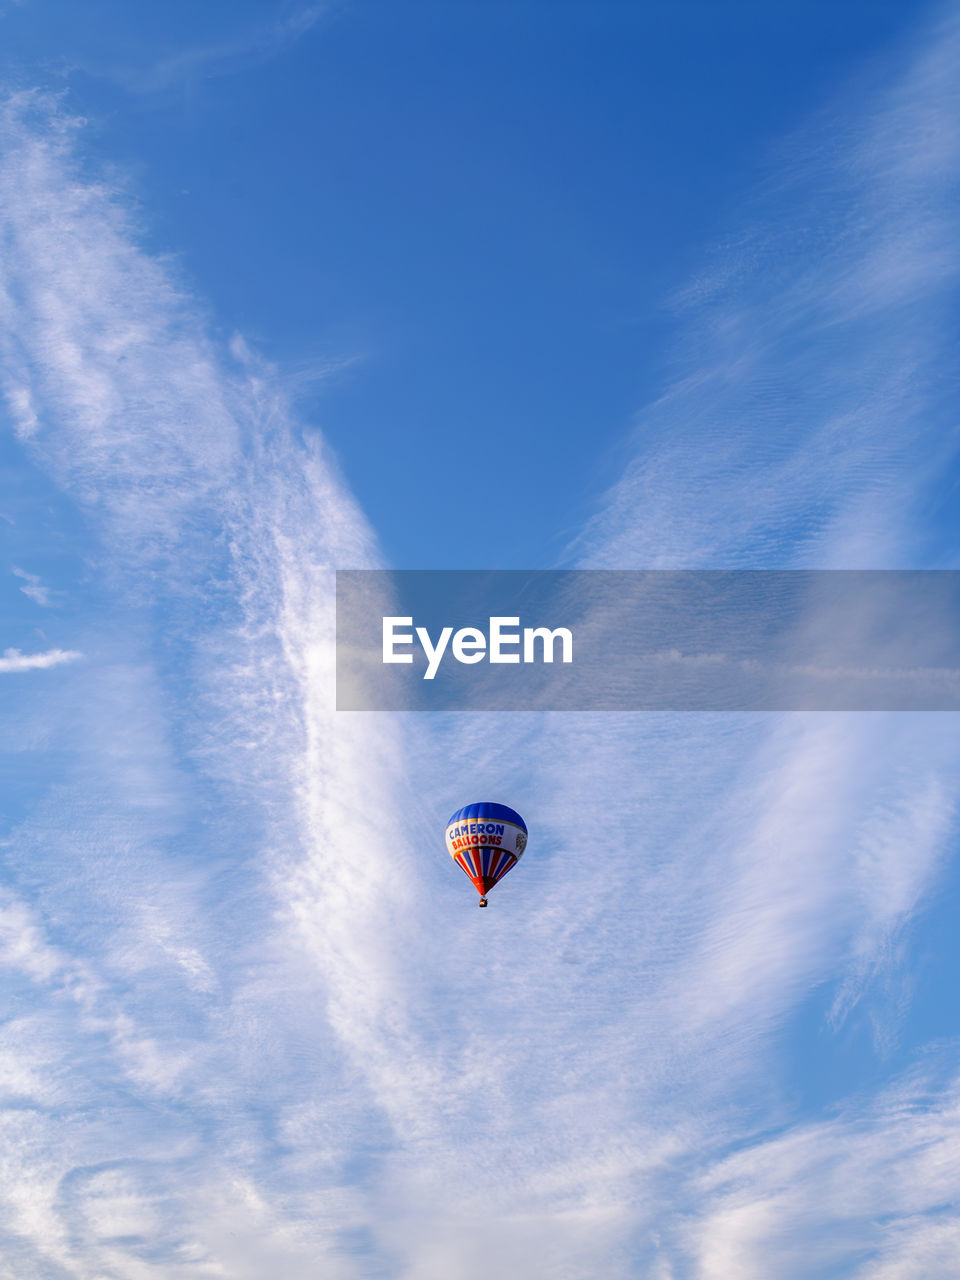 sky, blue, flying, mid-air, cloud, air vehicle, adventure, balloon, transportation, hot air balloon, nature, low angle view, aircraft, extreme sports, sports, vehicle, motion, day, joy, wing, environment, hot air ballooning, outdoors, mode of transportation, travel, parachute, multi colored, leisure activity, wind, no people, exhilaration, beauty in nature, toy, air sports, sunlight